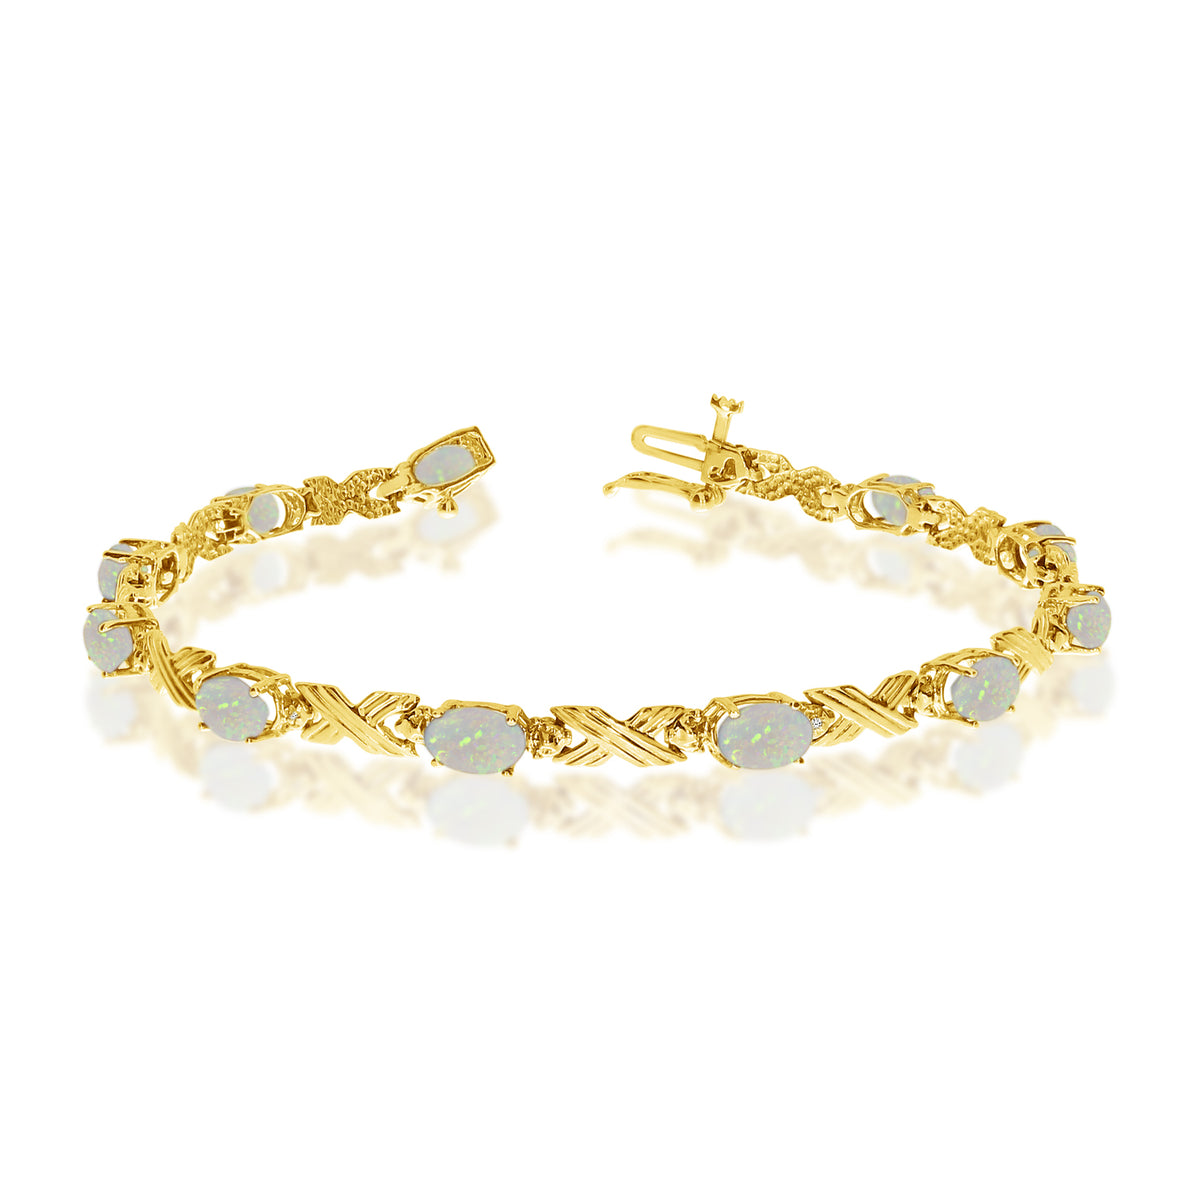 10K Yellow Gold Oval Opal Stones And Diamonds Tennis Bracelet, 7" fine designer jewelry for men and women